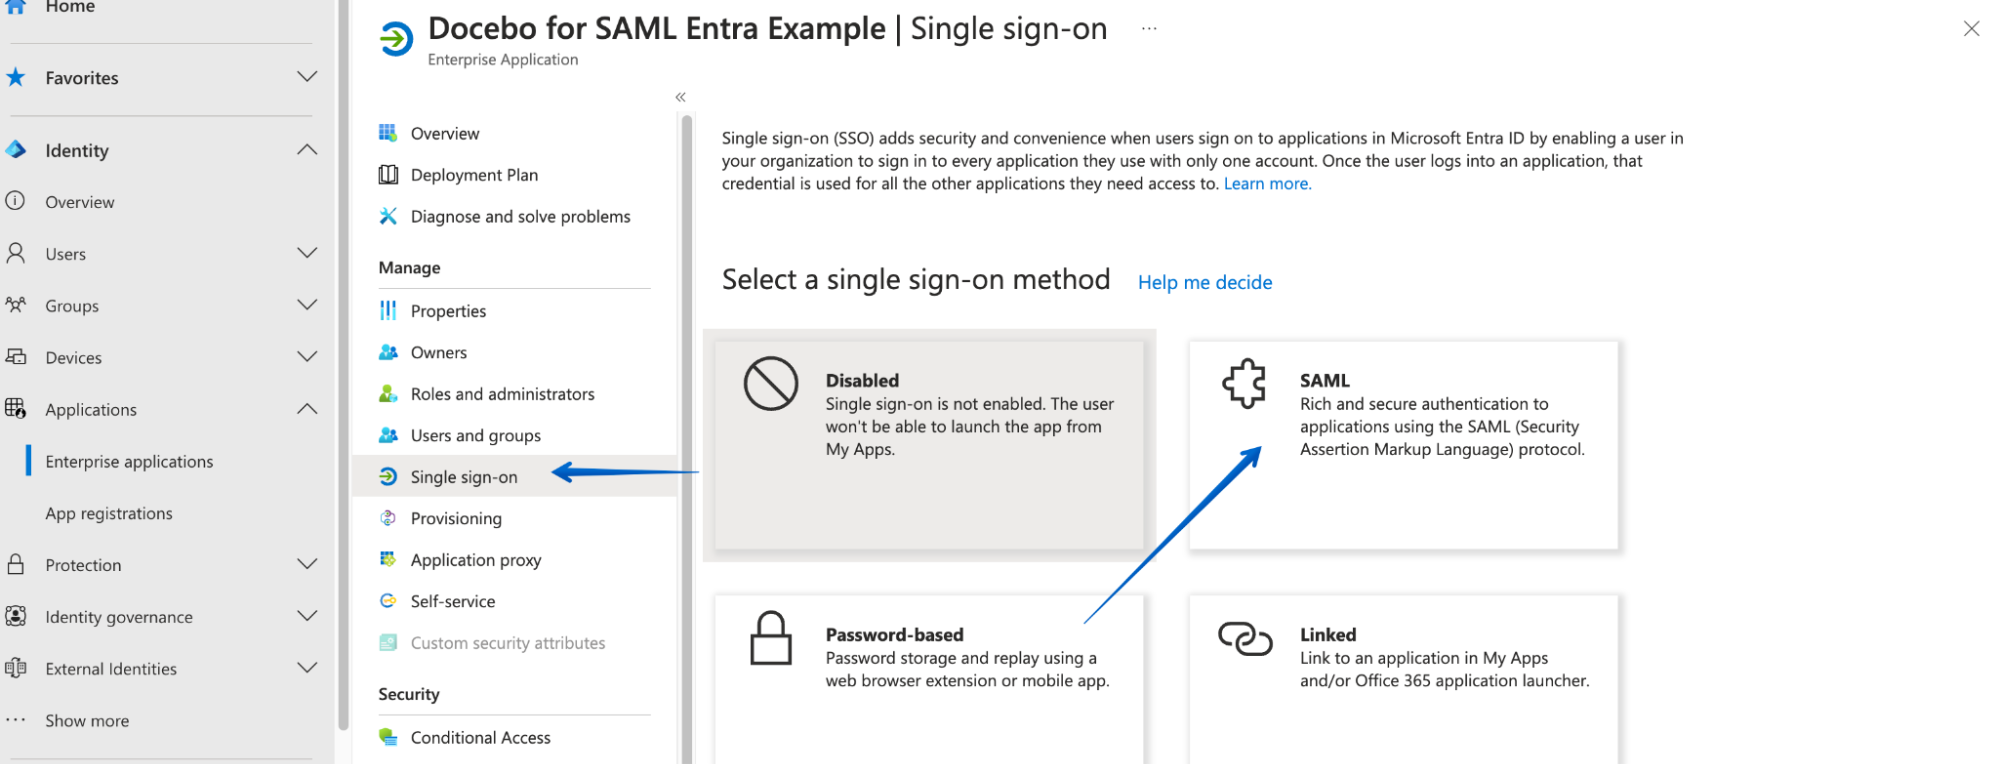 Pressing Single sign-on, and choosing SAML for the single sign-on method